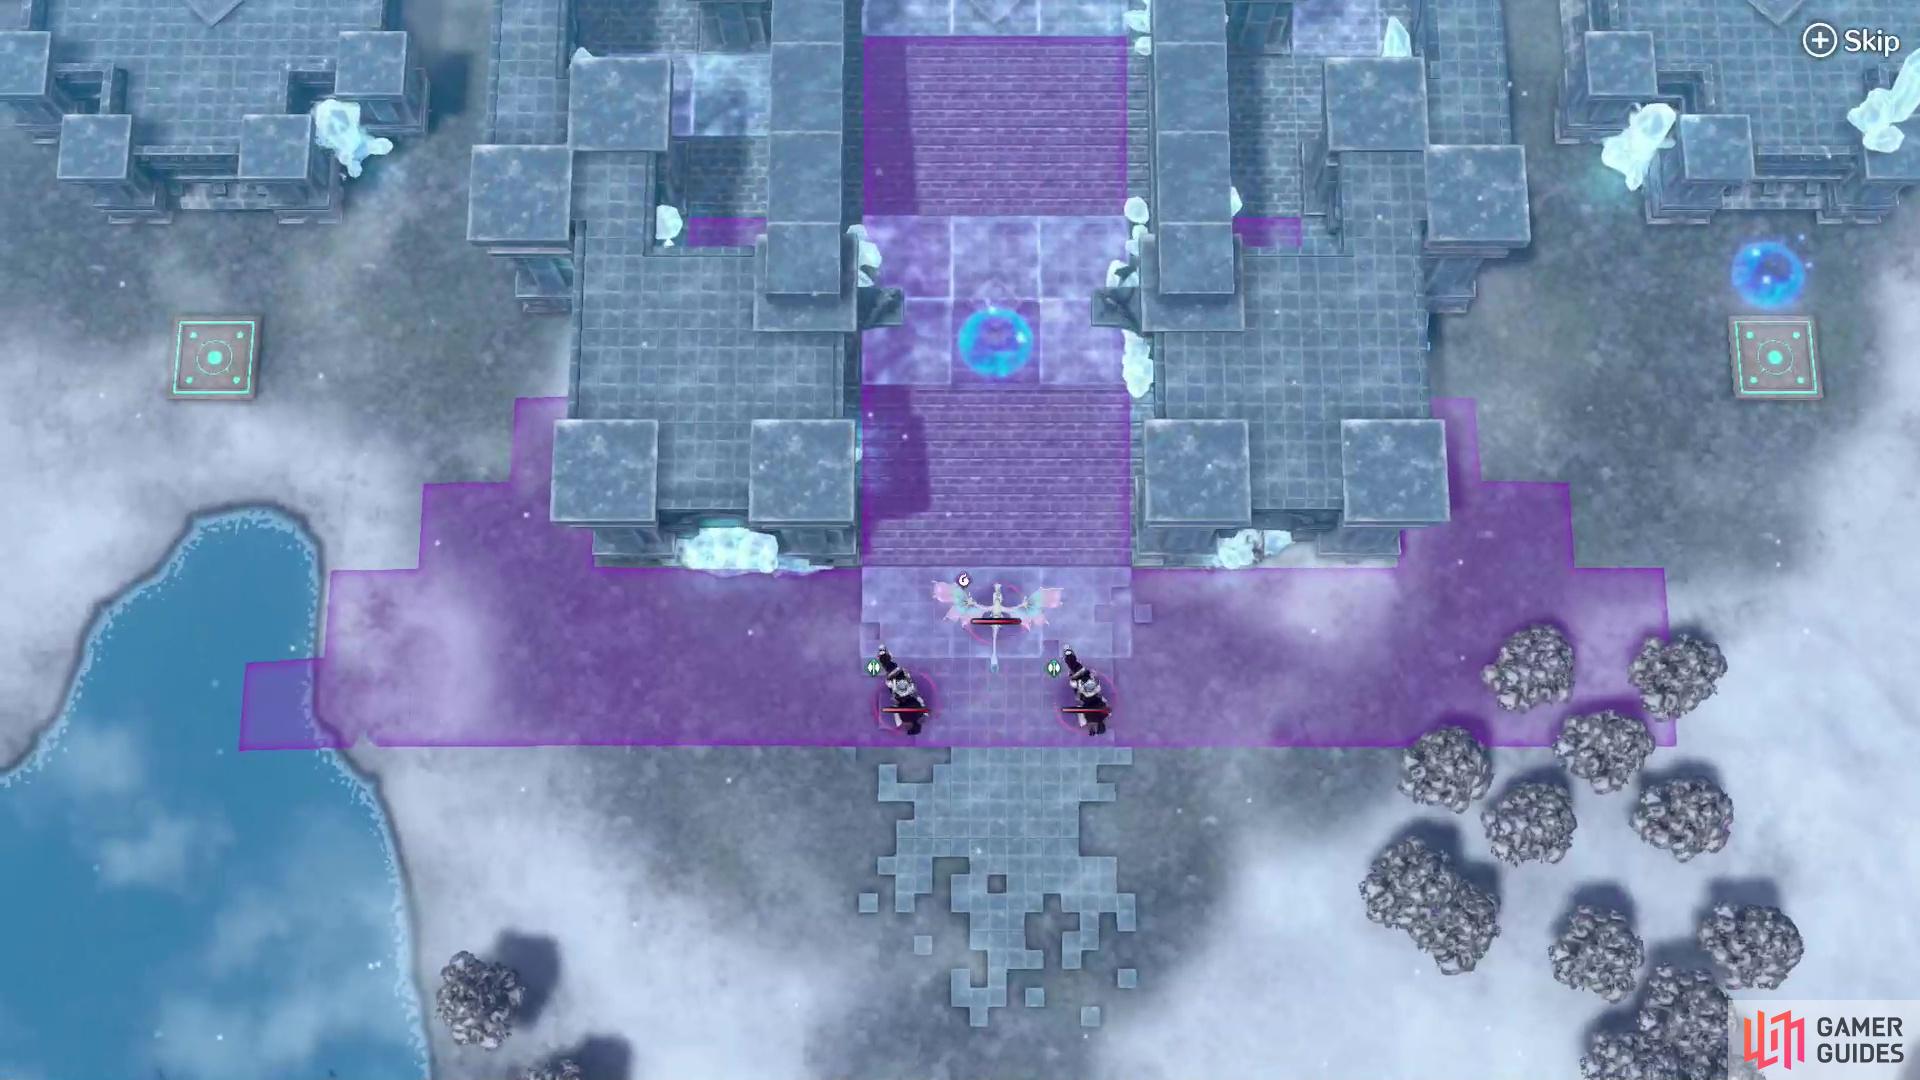 After activating the first Sigil, enemies will start spawning near the entrance to the Dragon Temple.